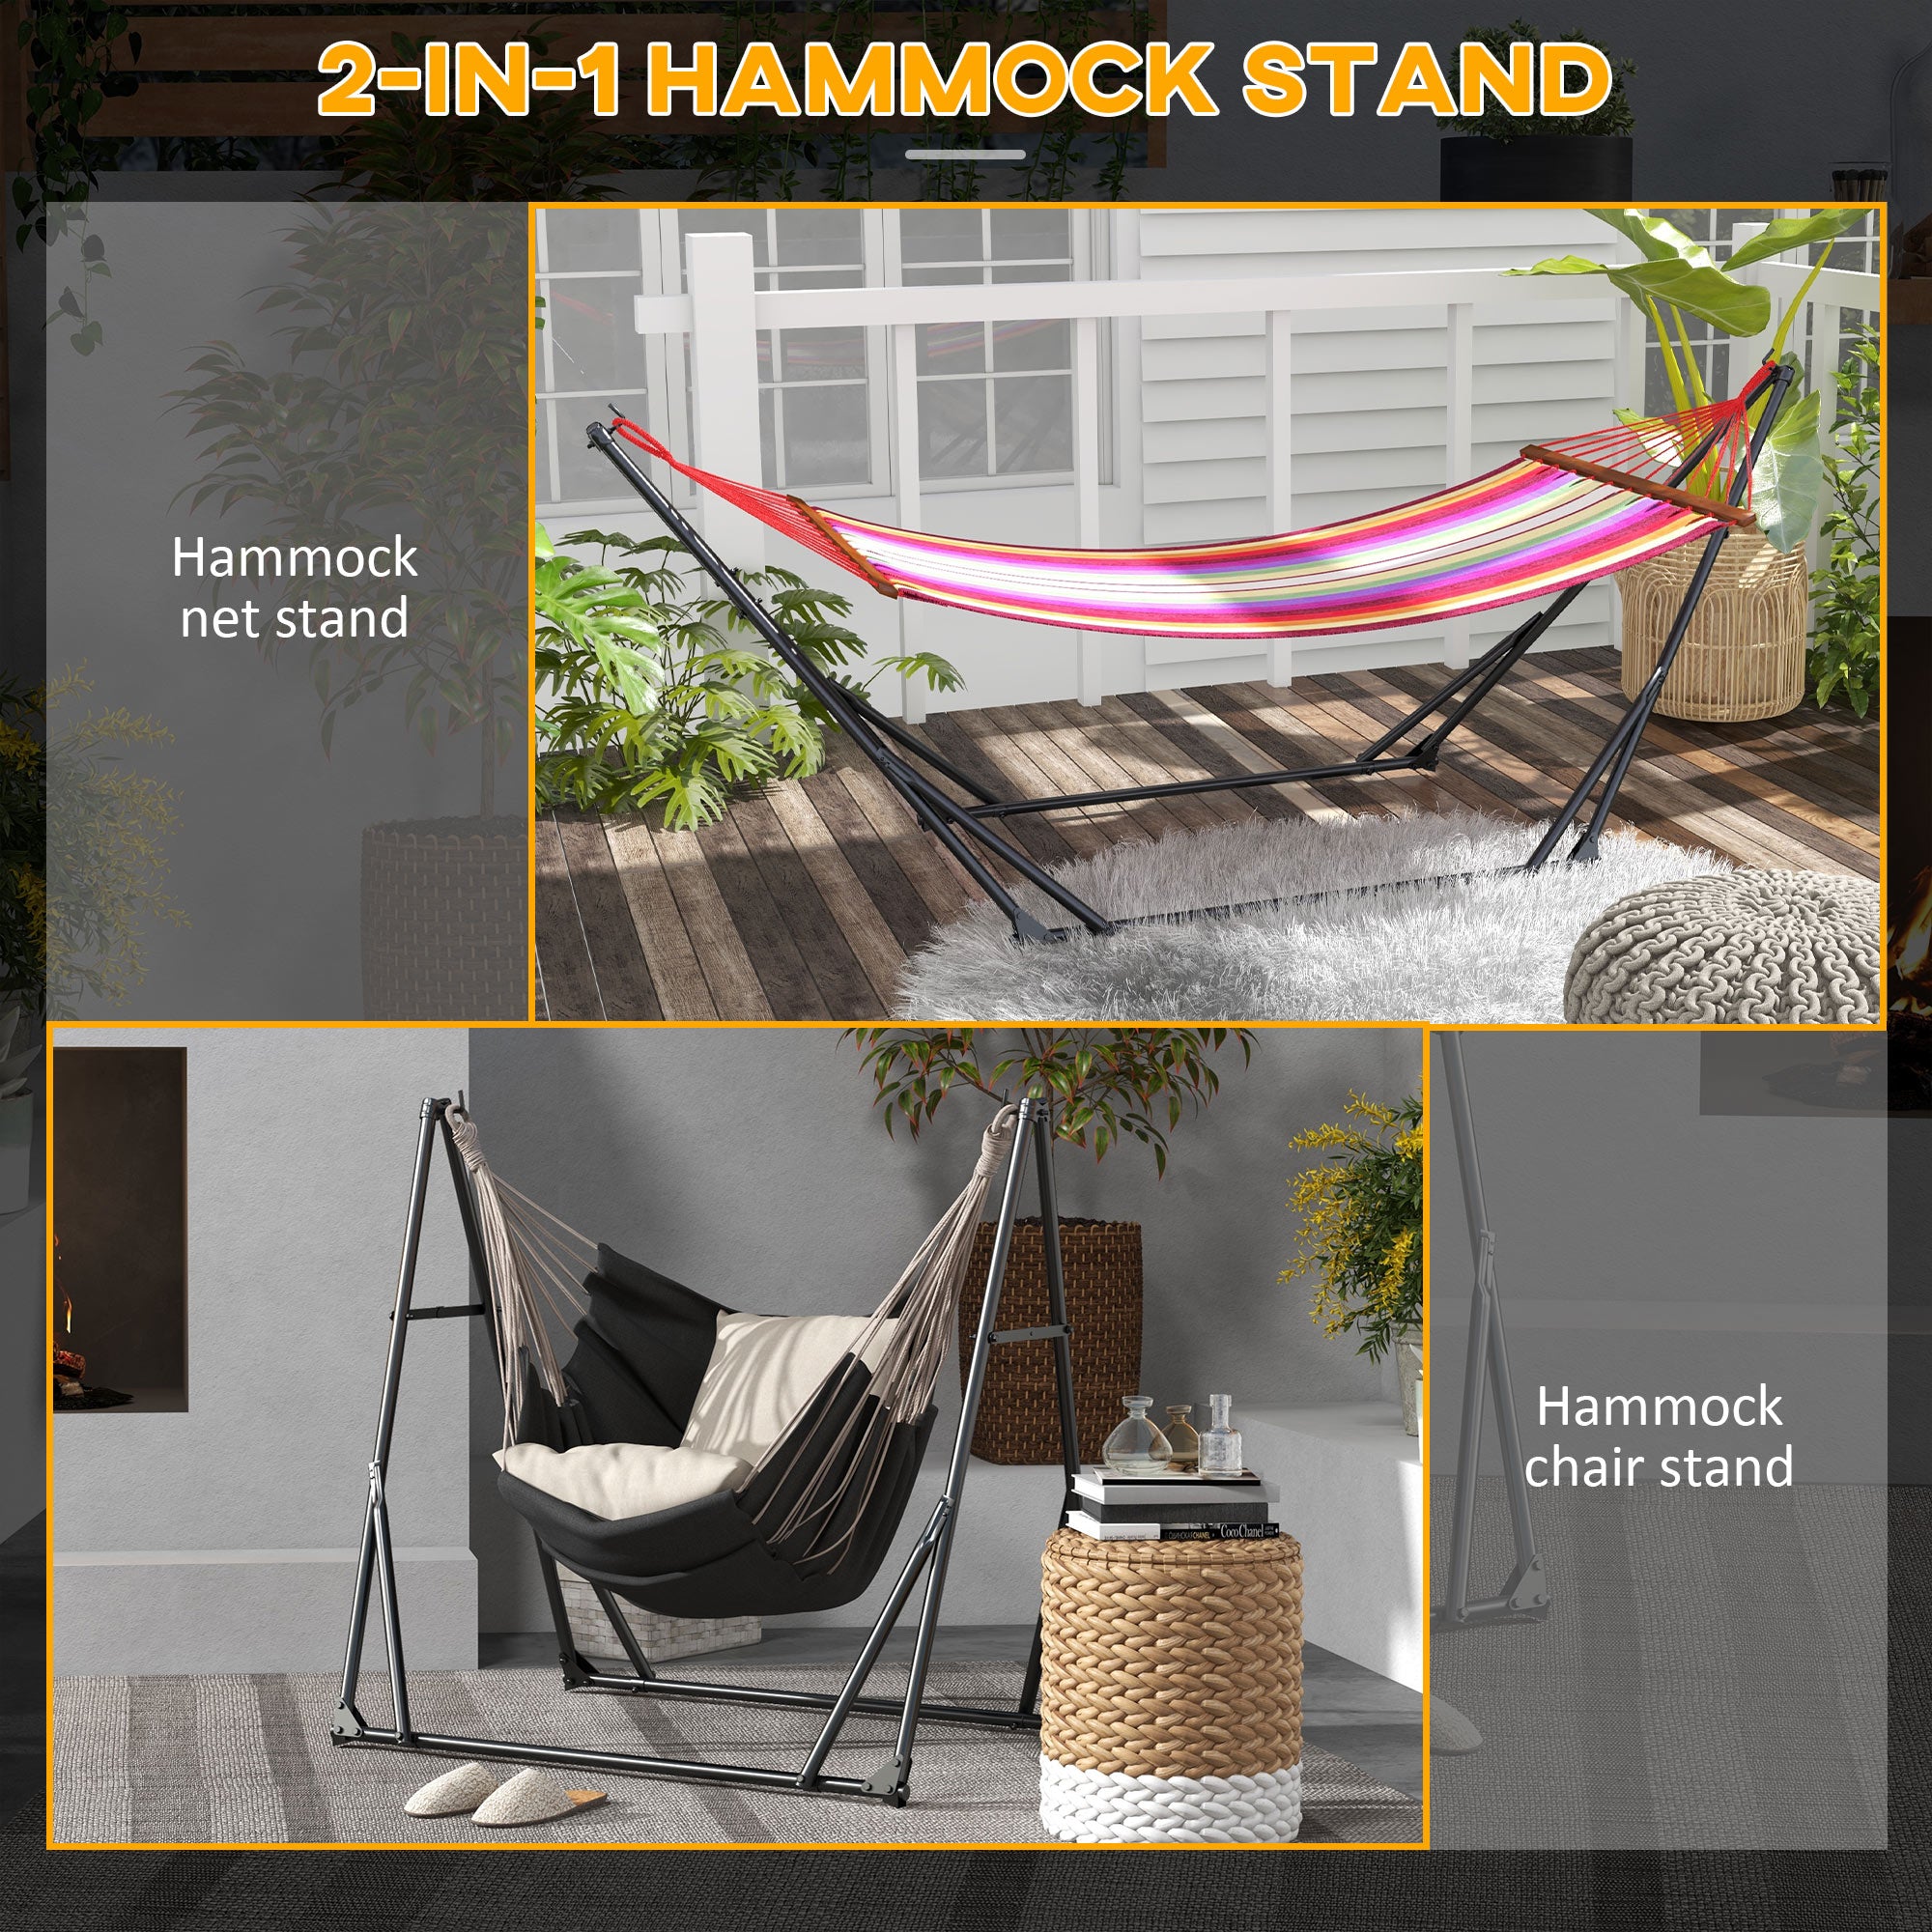 Outsunny Foldable Hammock Stand, Portable Hammock with Metal Frame, 2 in 1 Hammock Net Stand, Hammock Chair Stand, Load Capacity 120kg